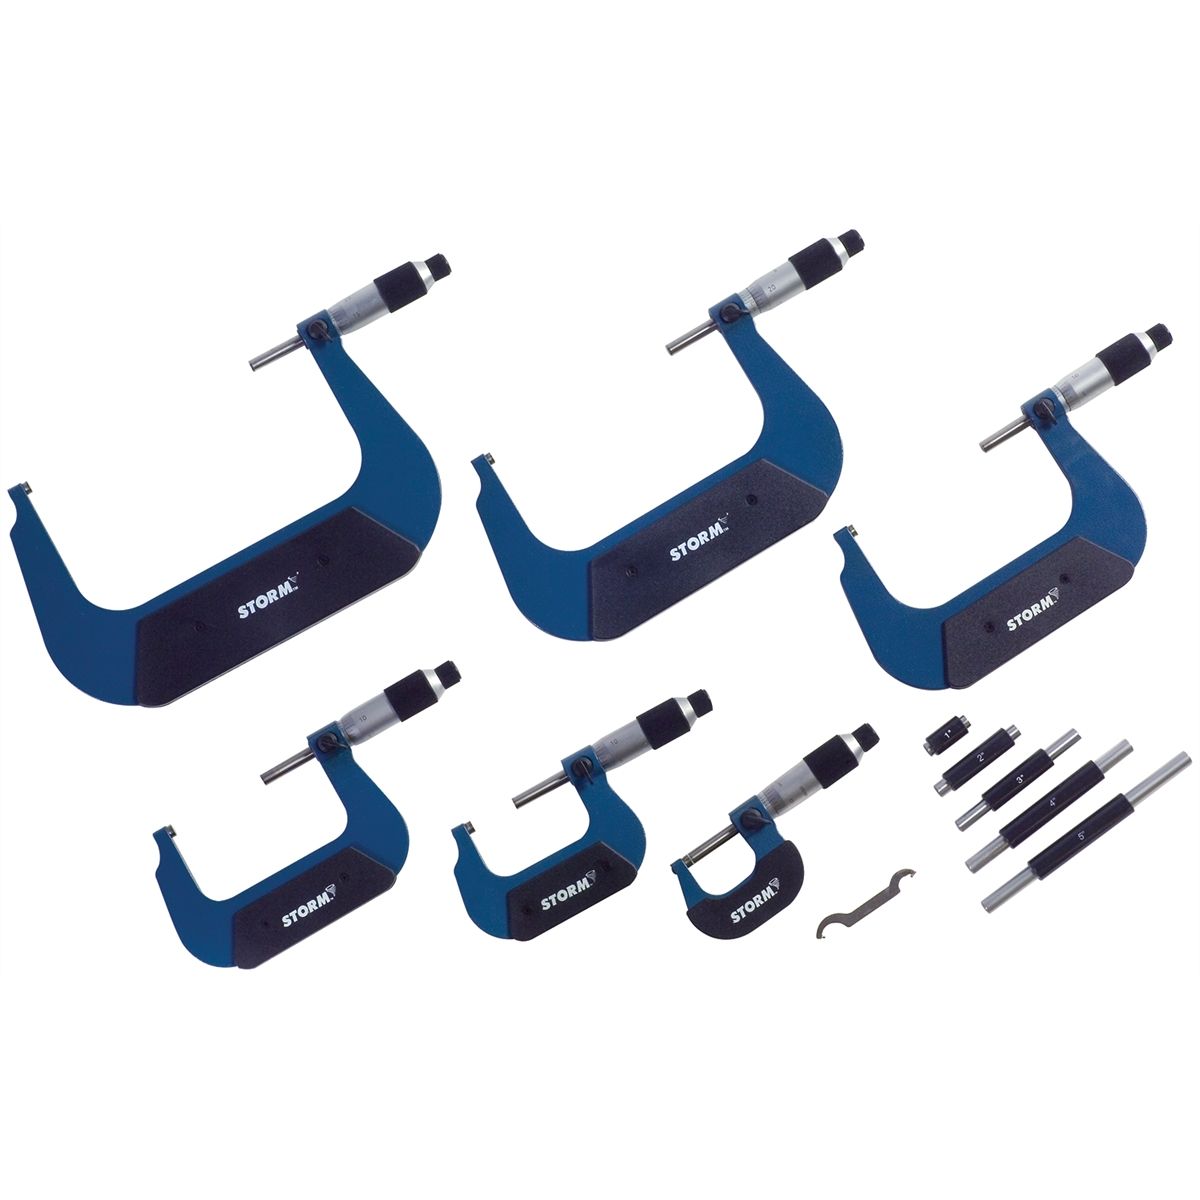 0-6" Conventional Micrometer 6 pc Set